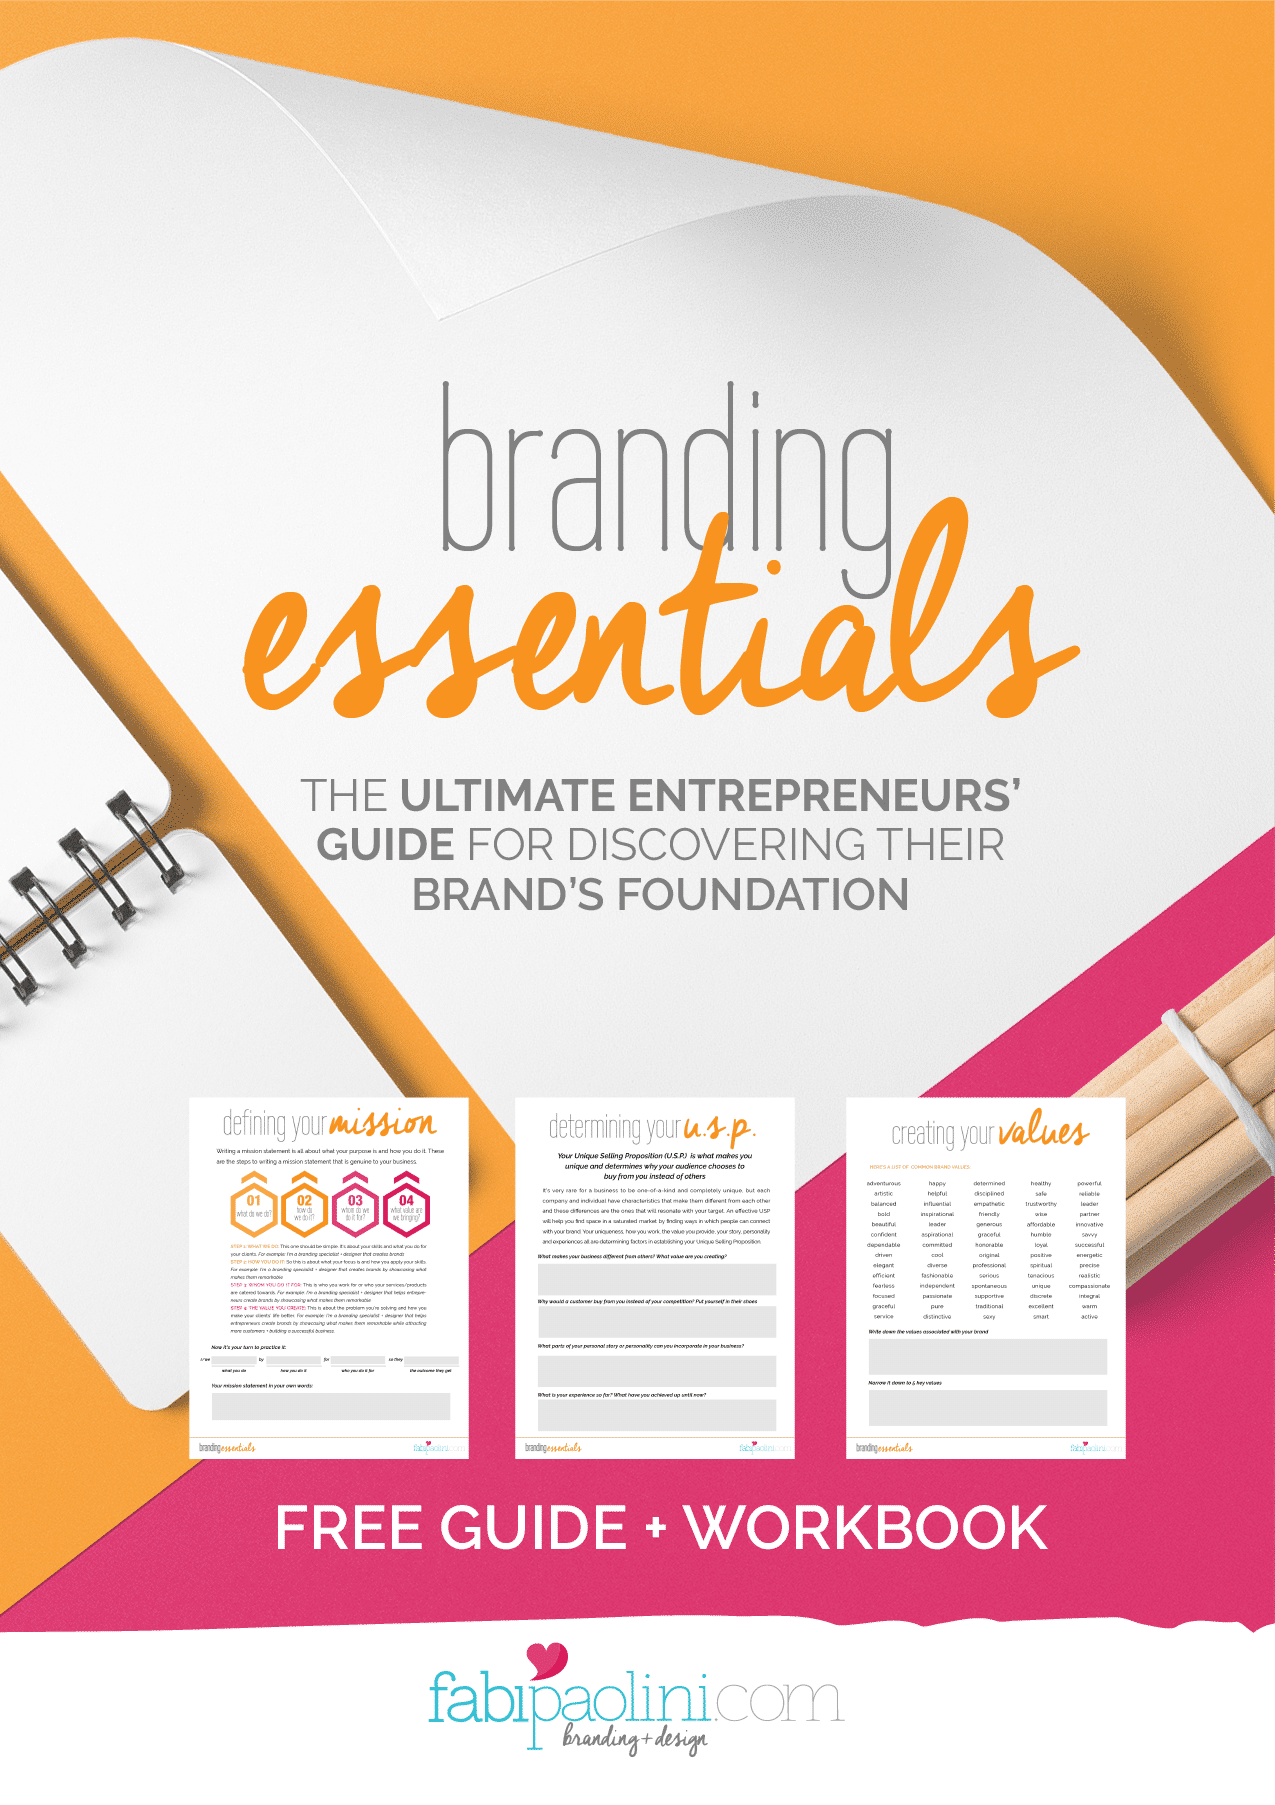 Branding Essentials: The ultimate entrepreneur's guide for discovering their brand's foundations | Mission + Unique Selling Proposition + Differentiation + Values | Branding + Design Fabi Paolini